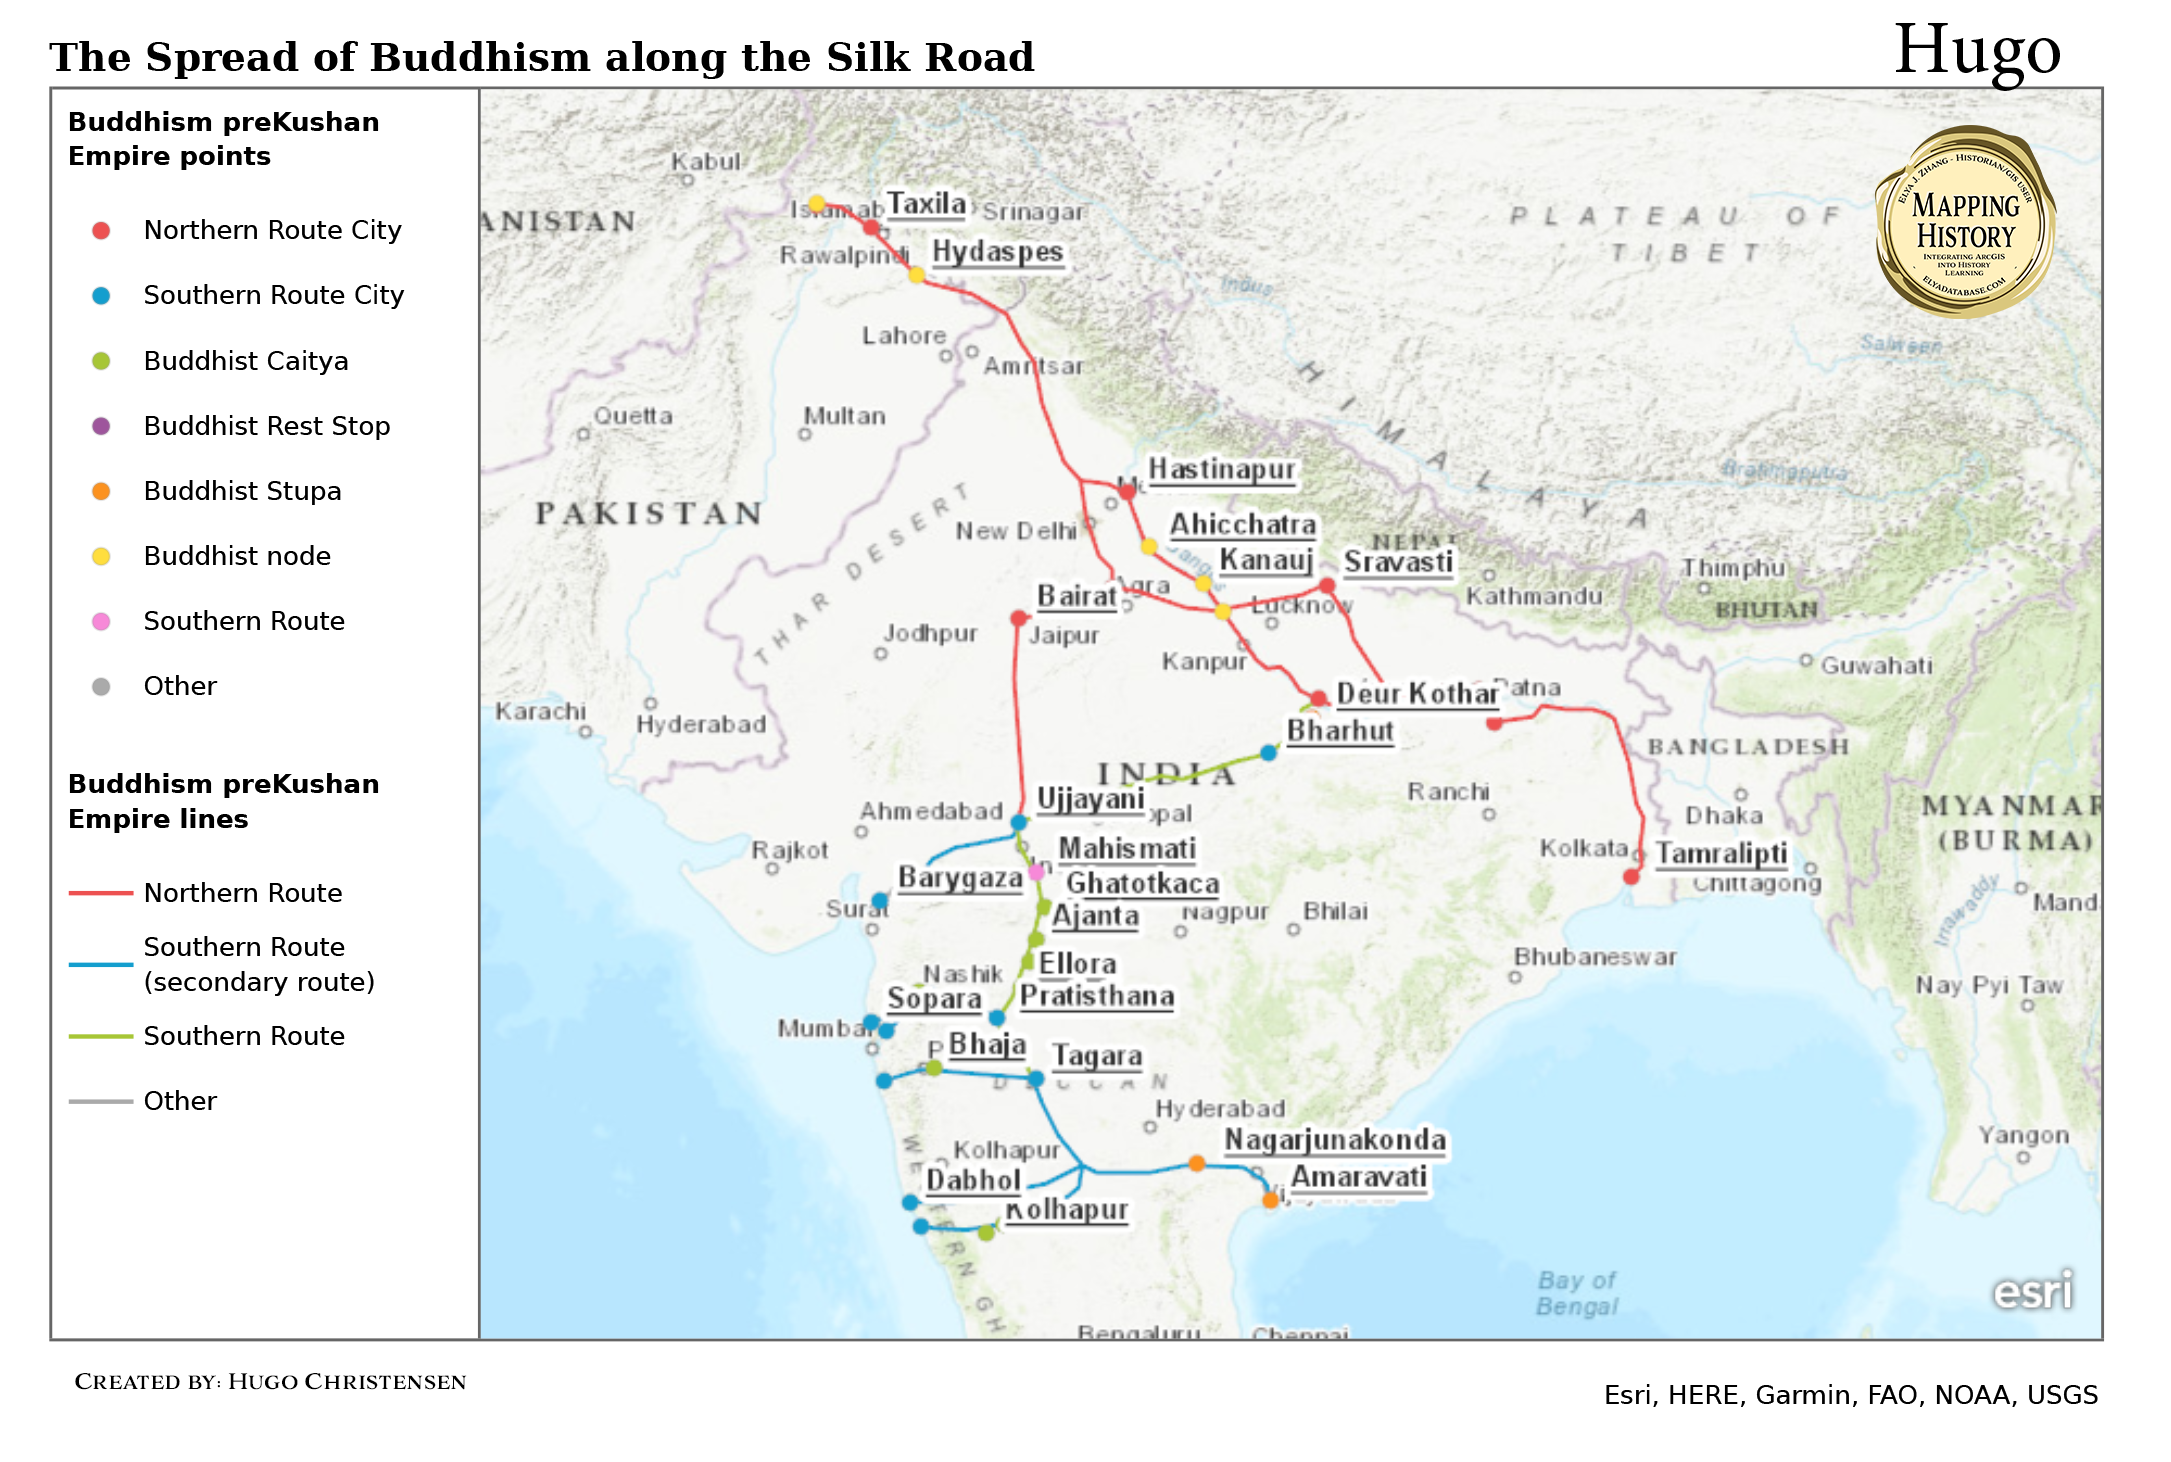 The Spread of Buddhism Along the Silk Road